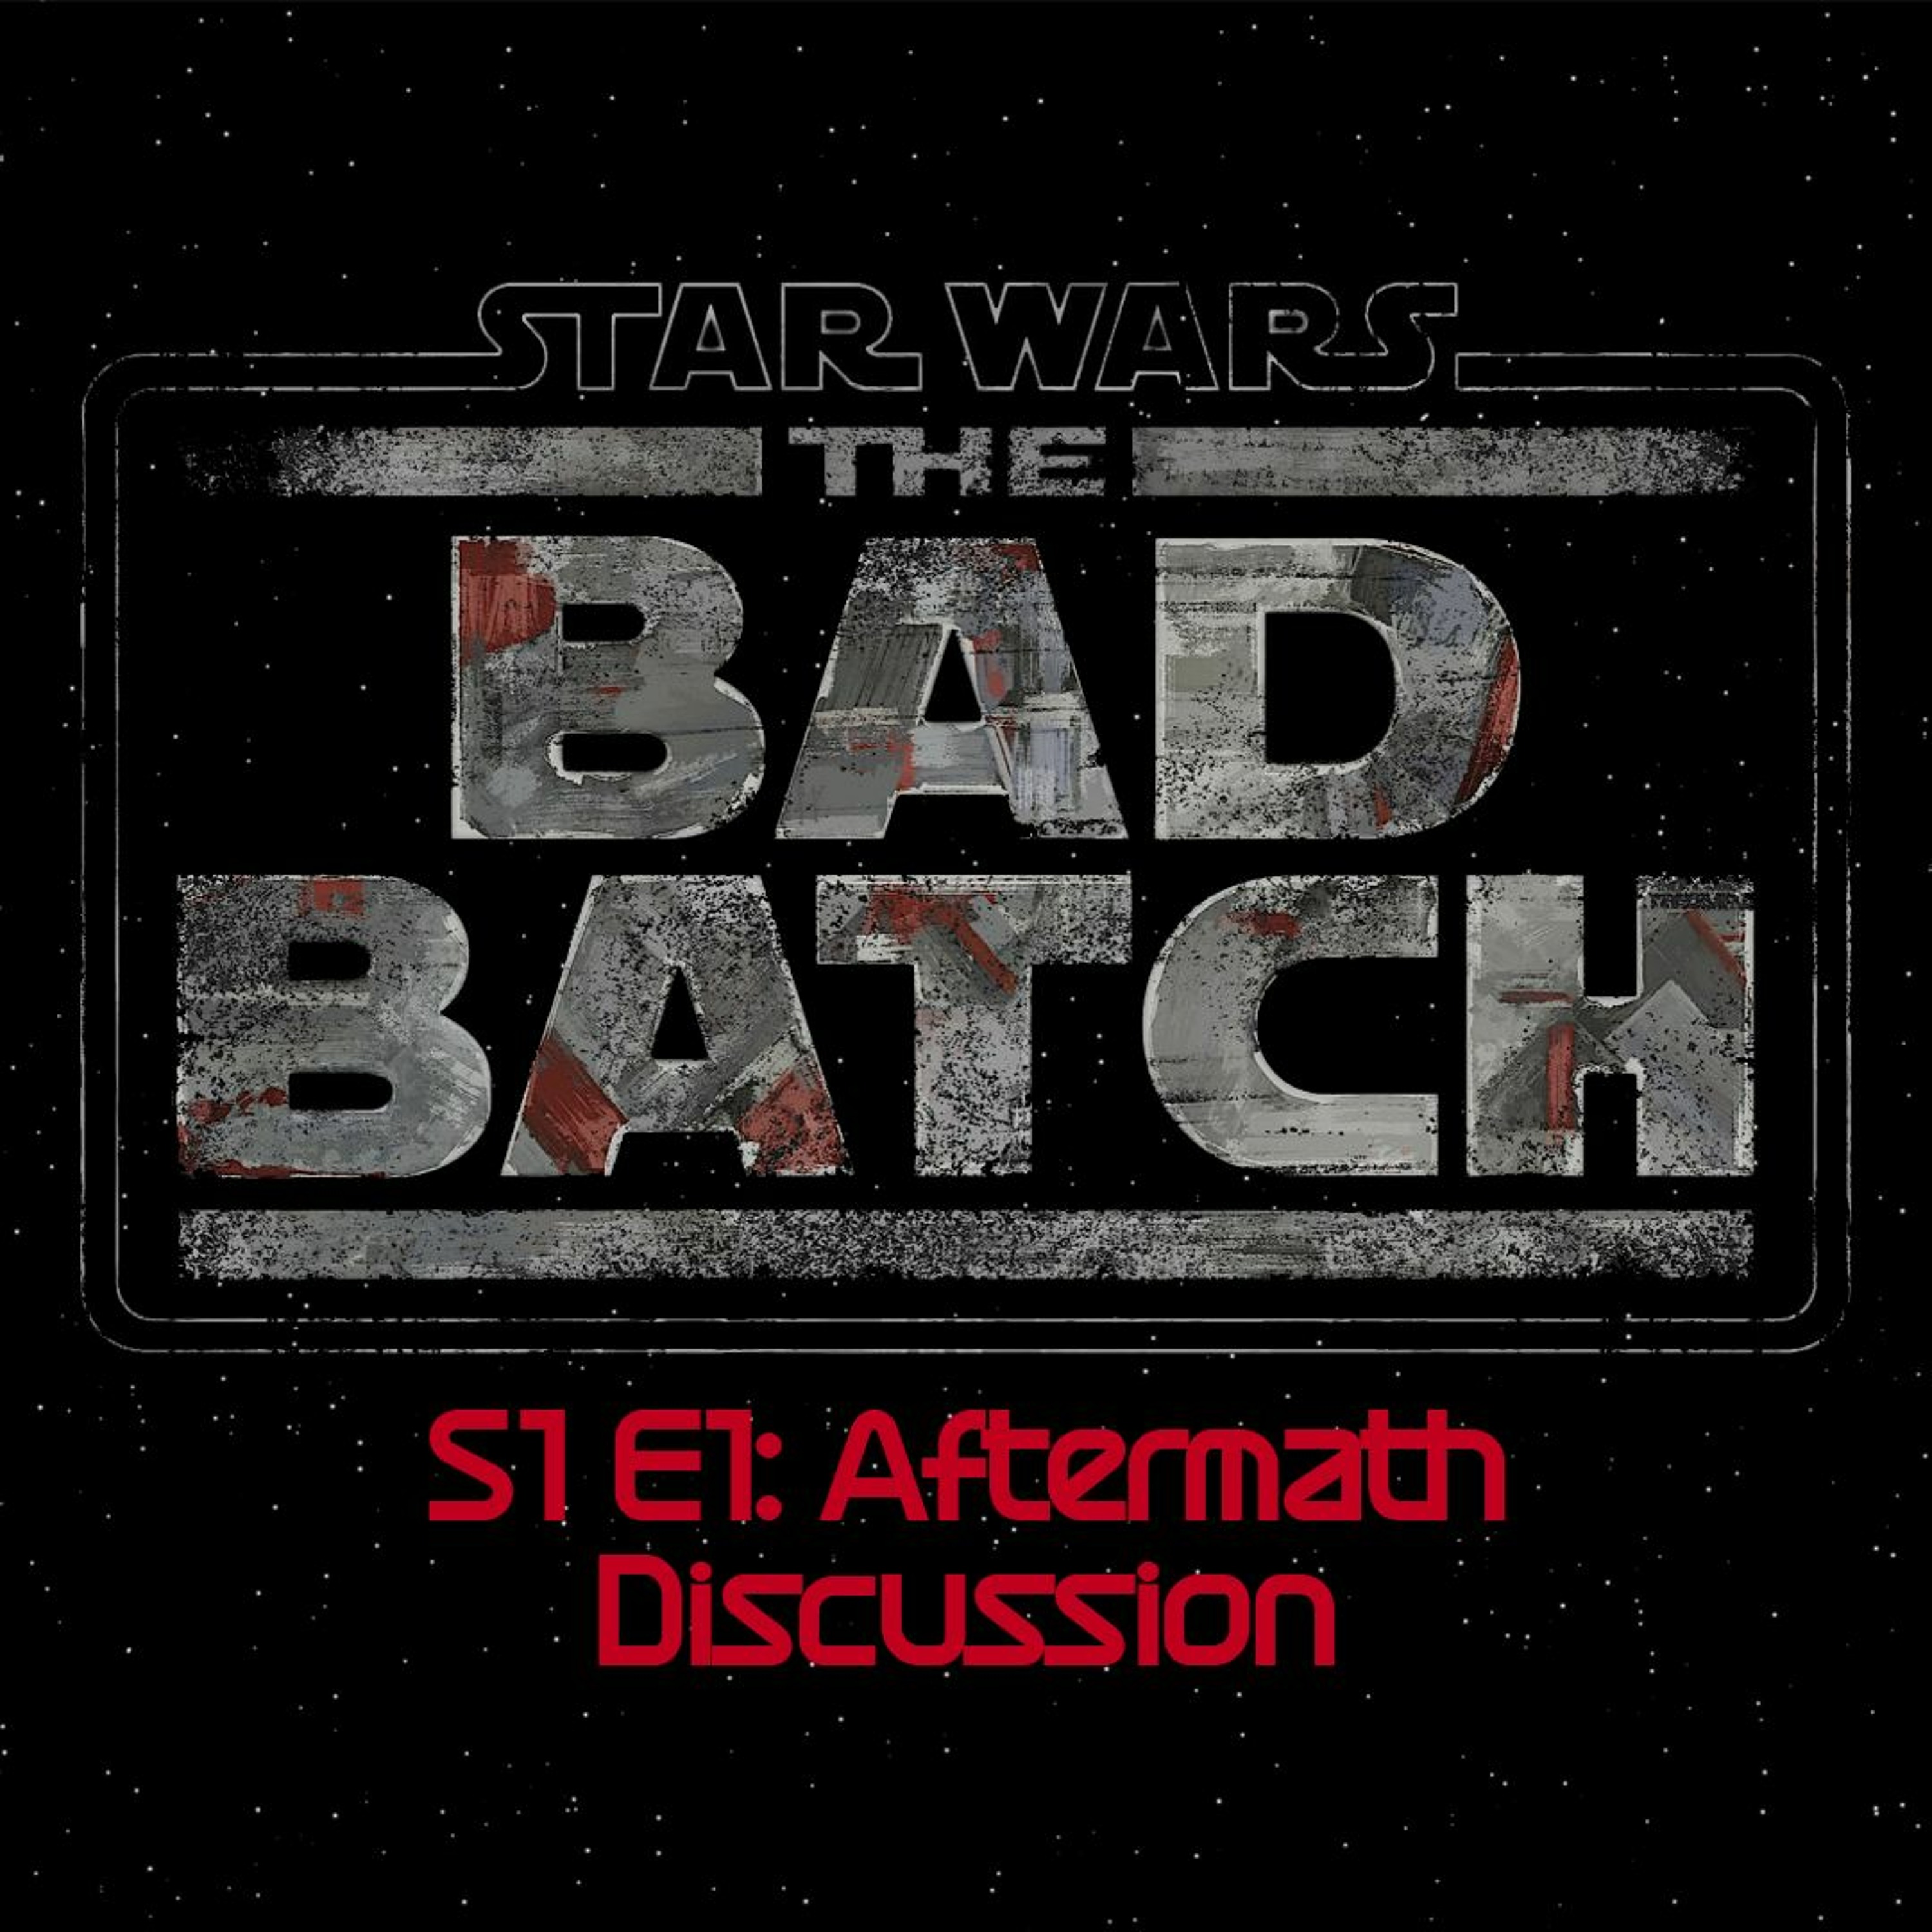 The Bad Batch S1E1: Aftermath